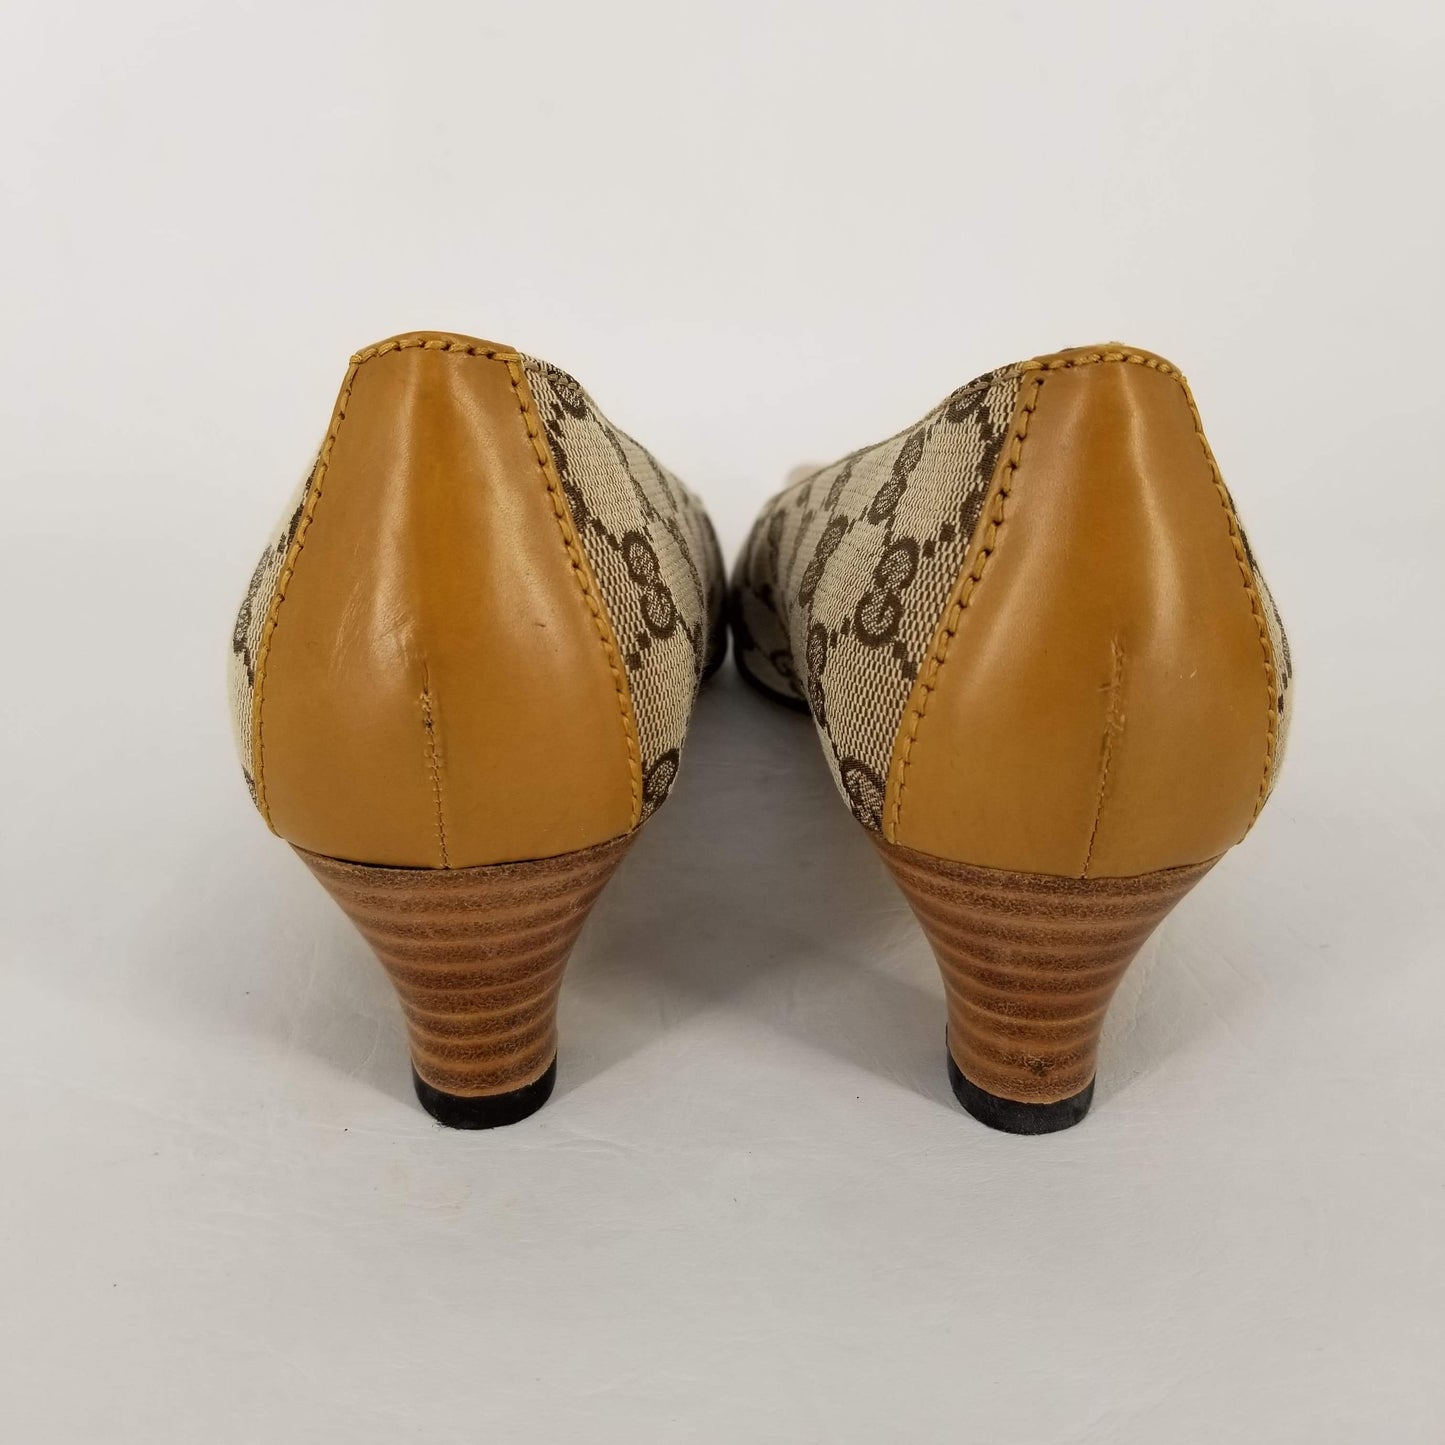 Authentic Gucci Gold Guccissima Low Heels Sz 9.5